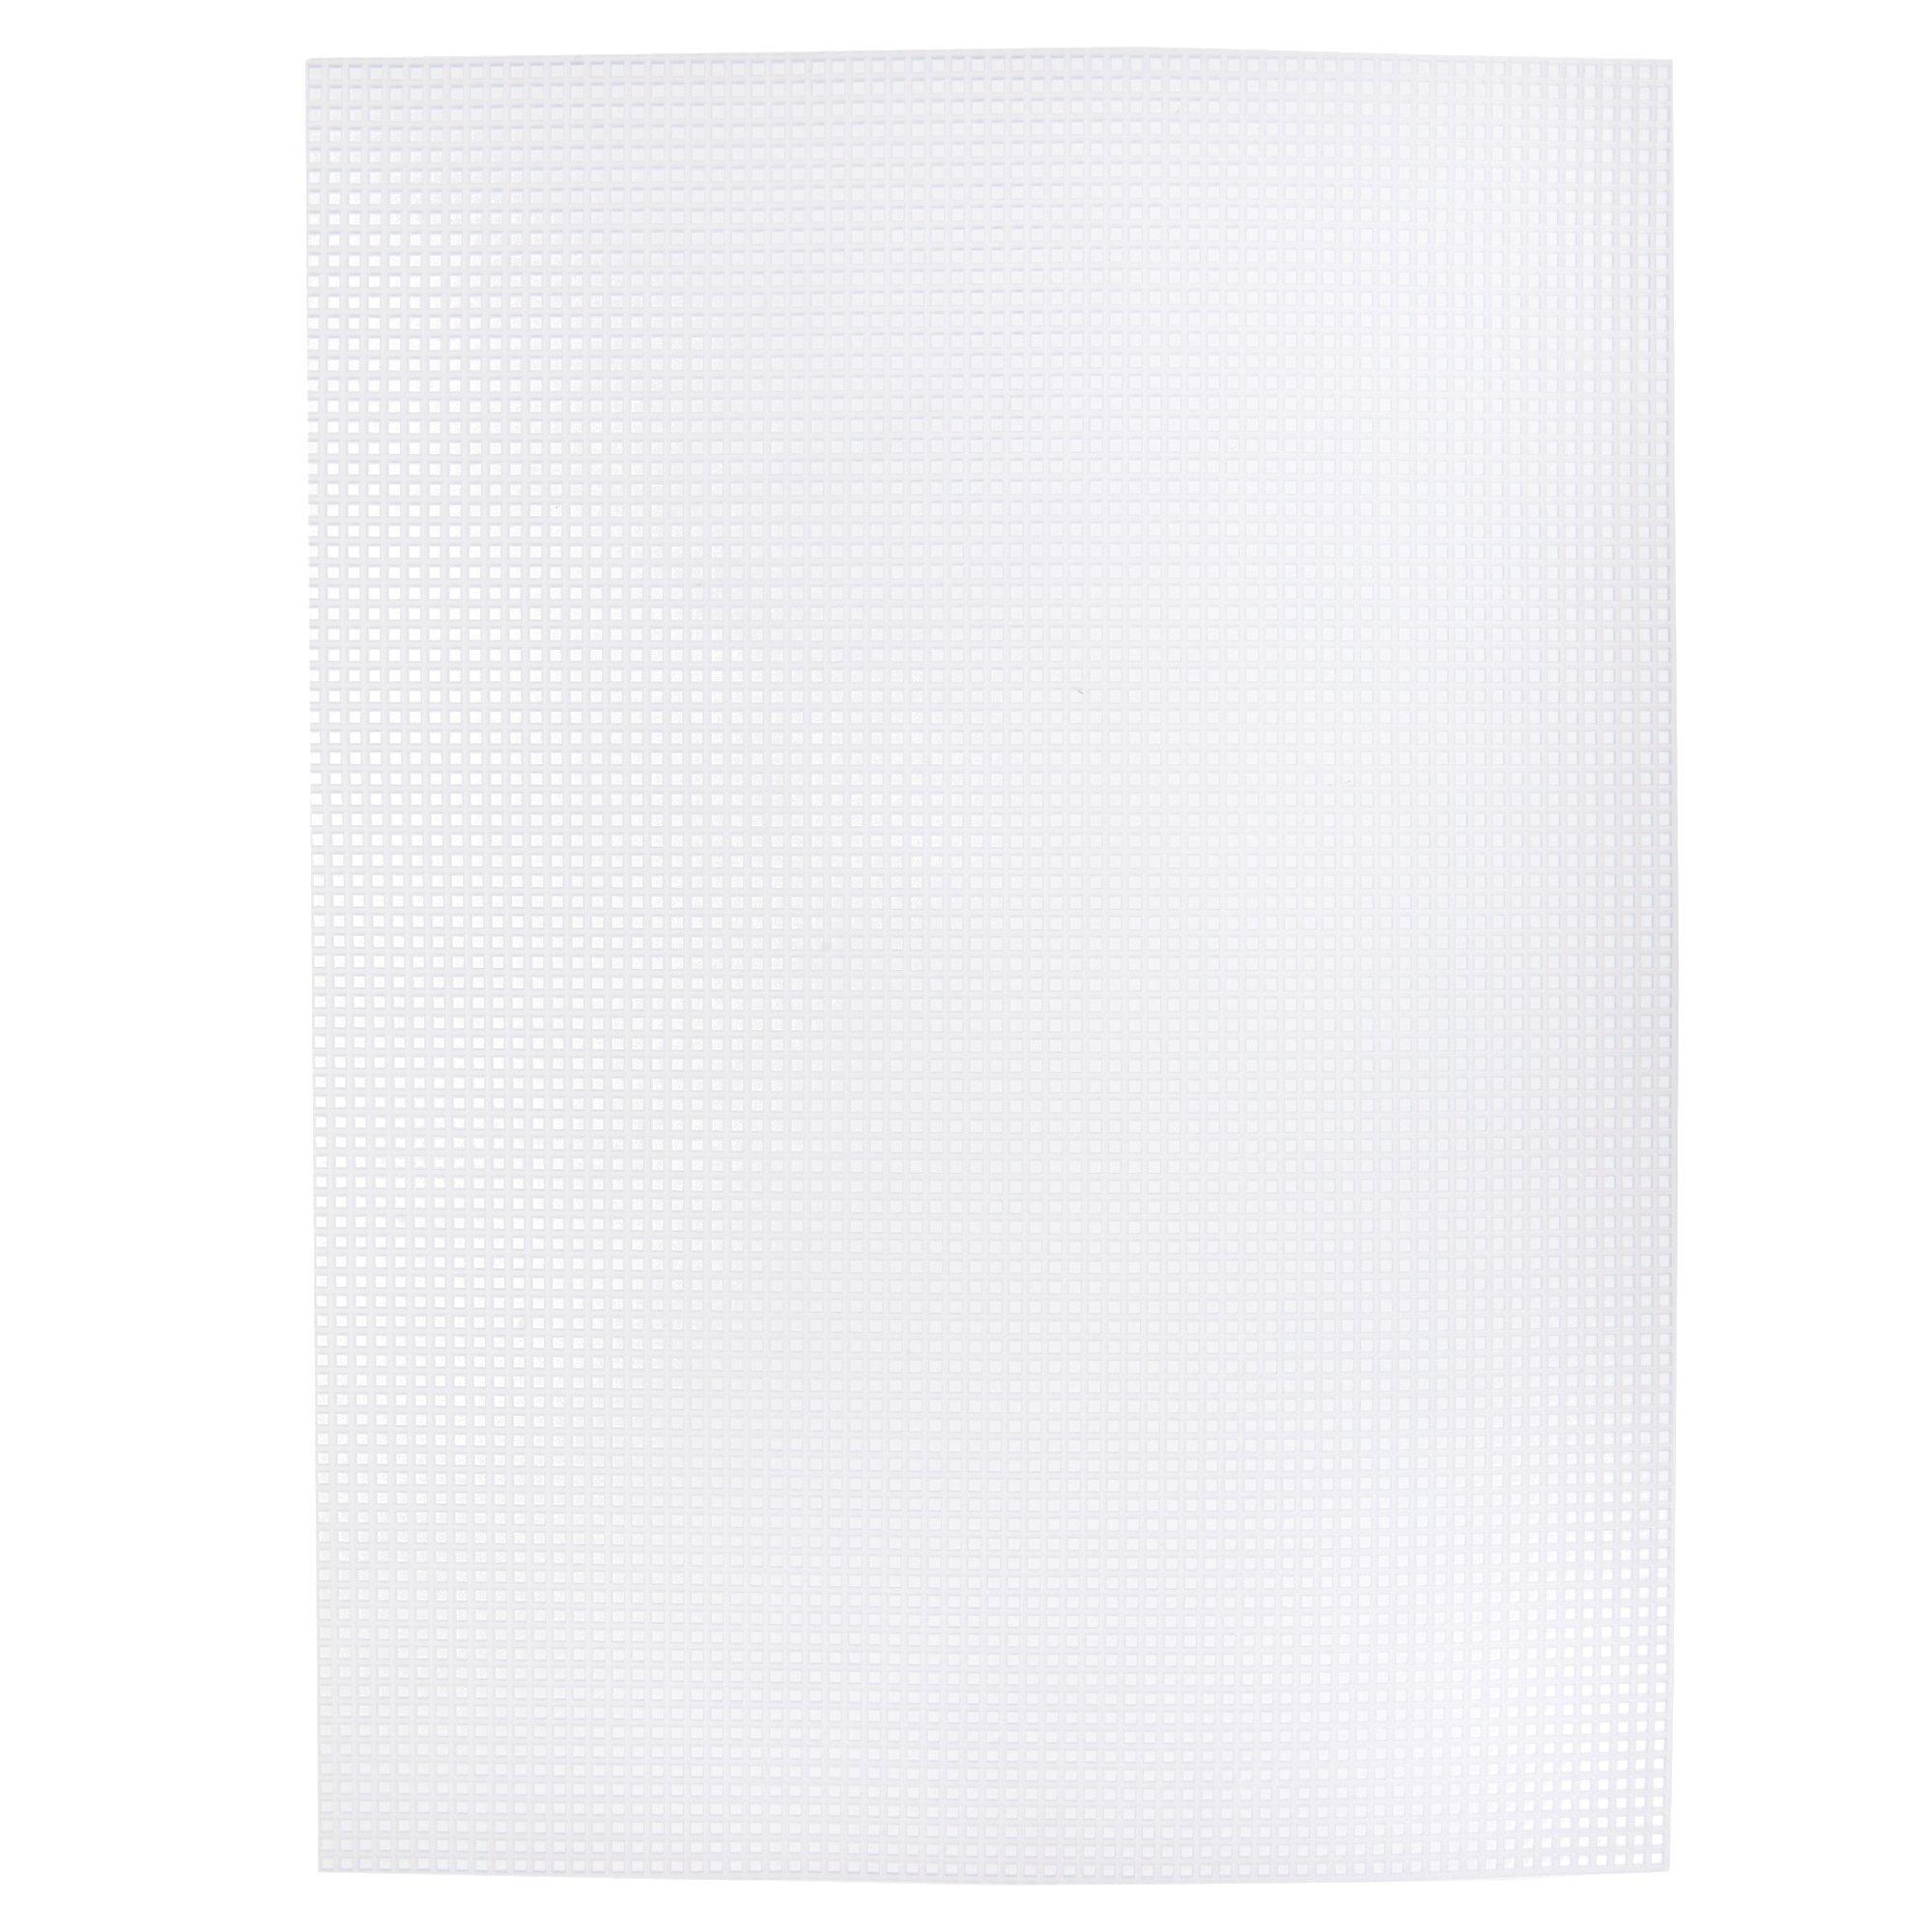 Plastic Canvas Sheets Perforated Plastic 7 Count, 10.5 by 13.5